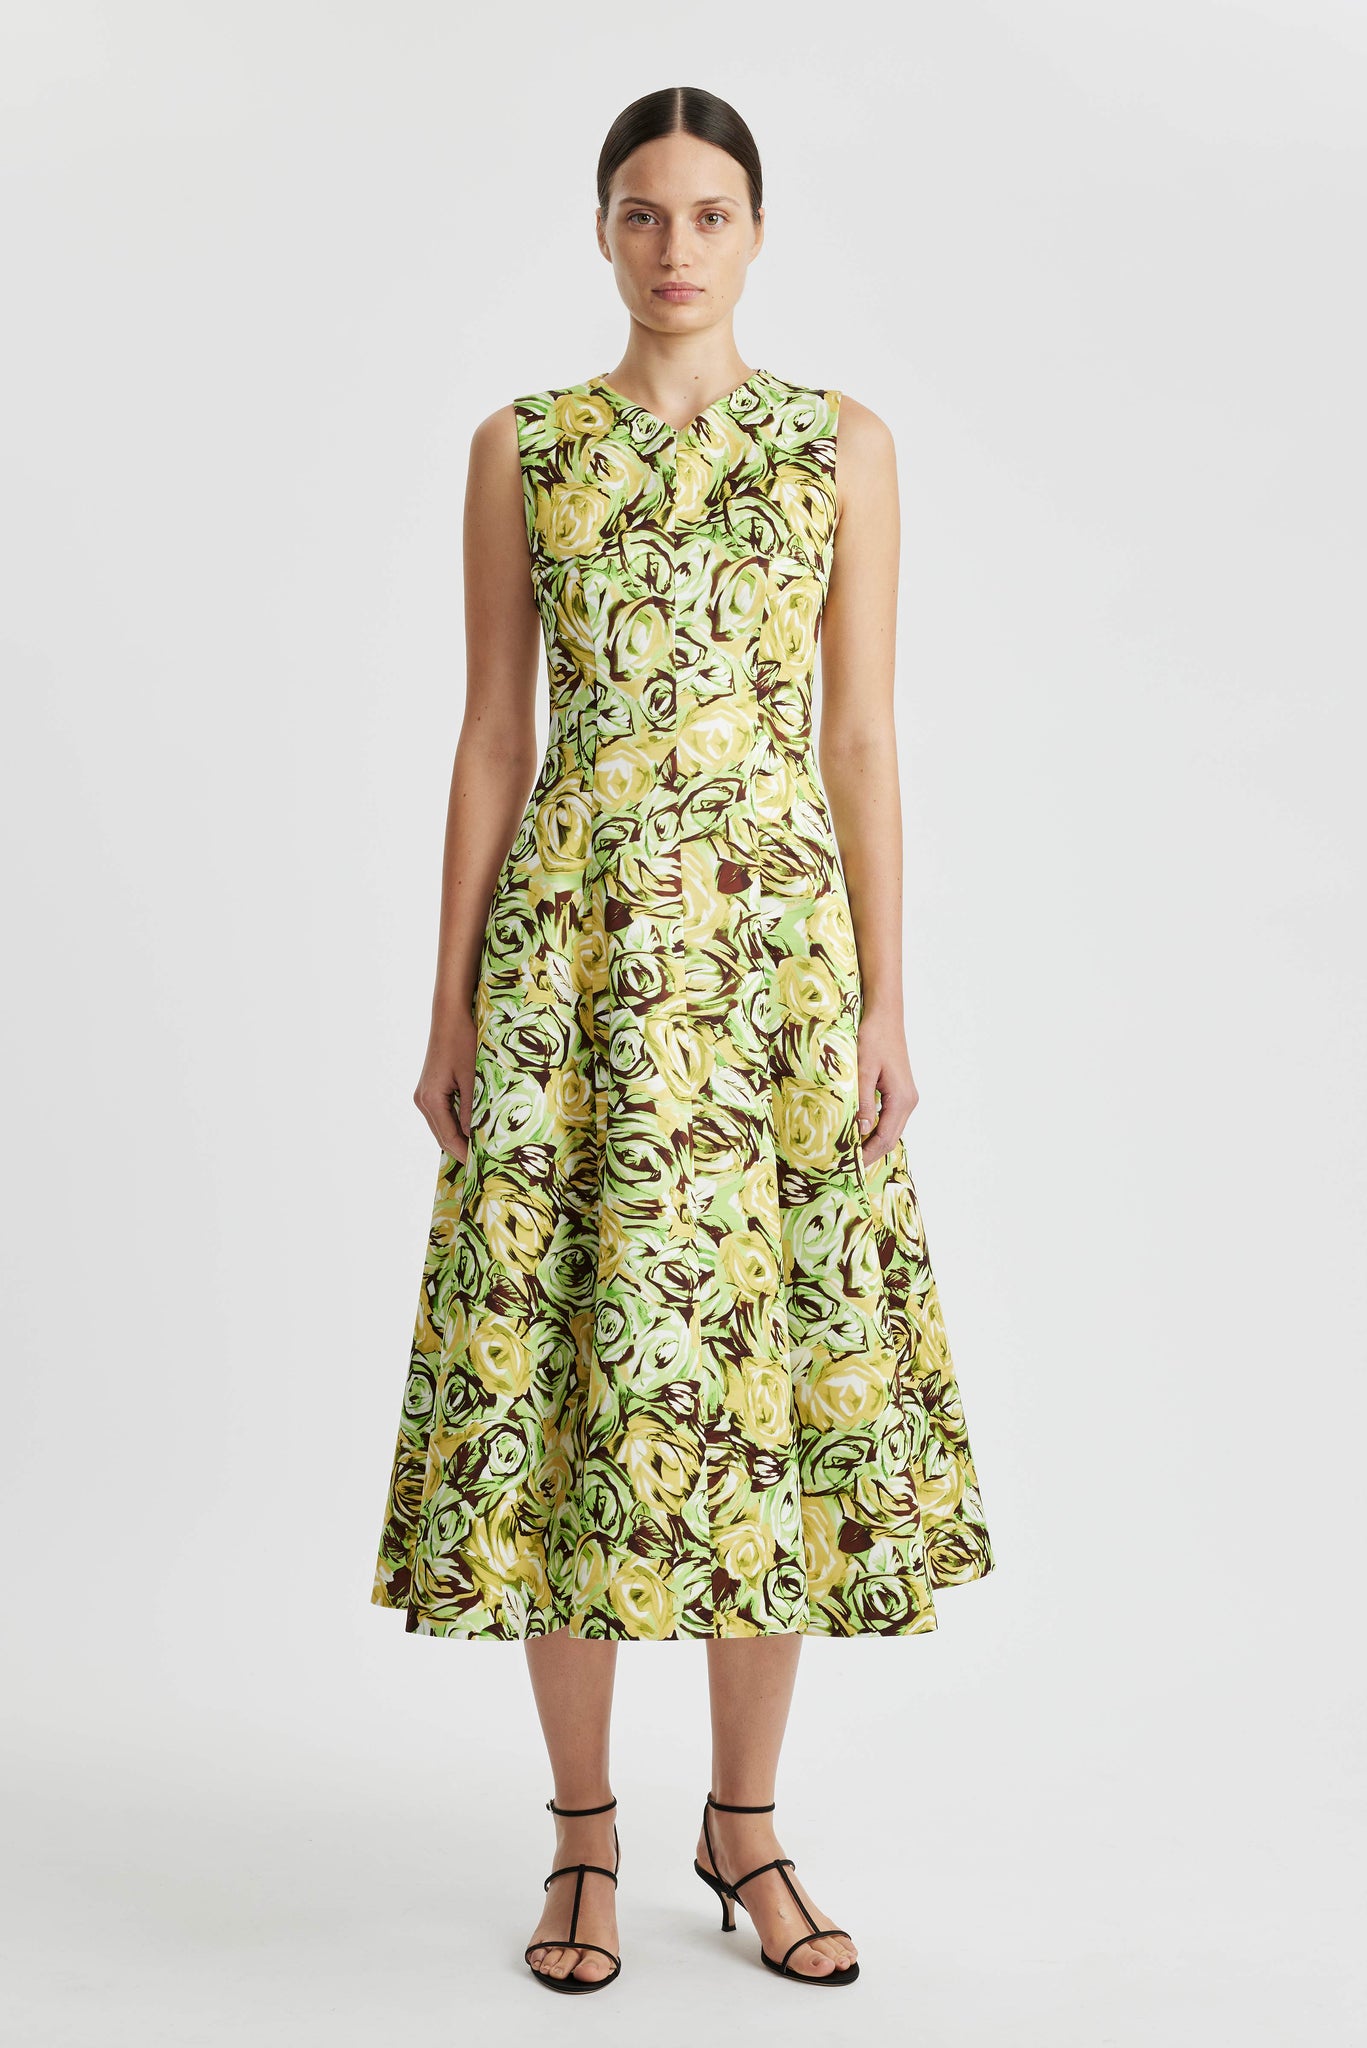 Madi Dress In Abstract Green And Lemon Rose Printed Twill | Emilia Wickstead